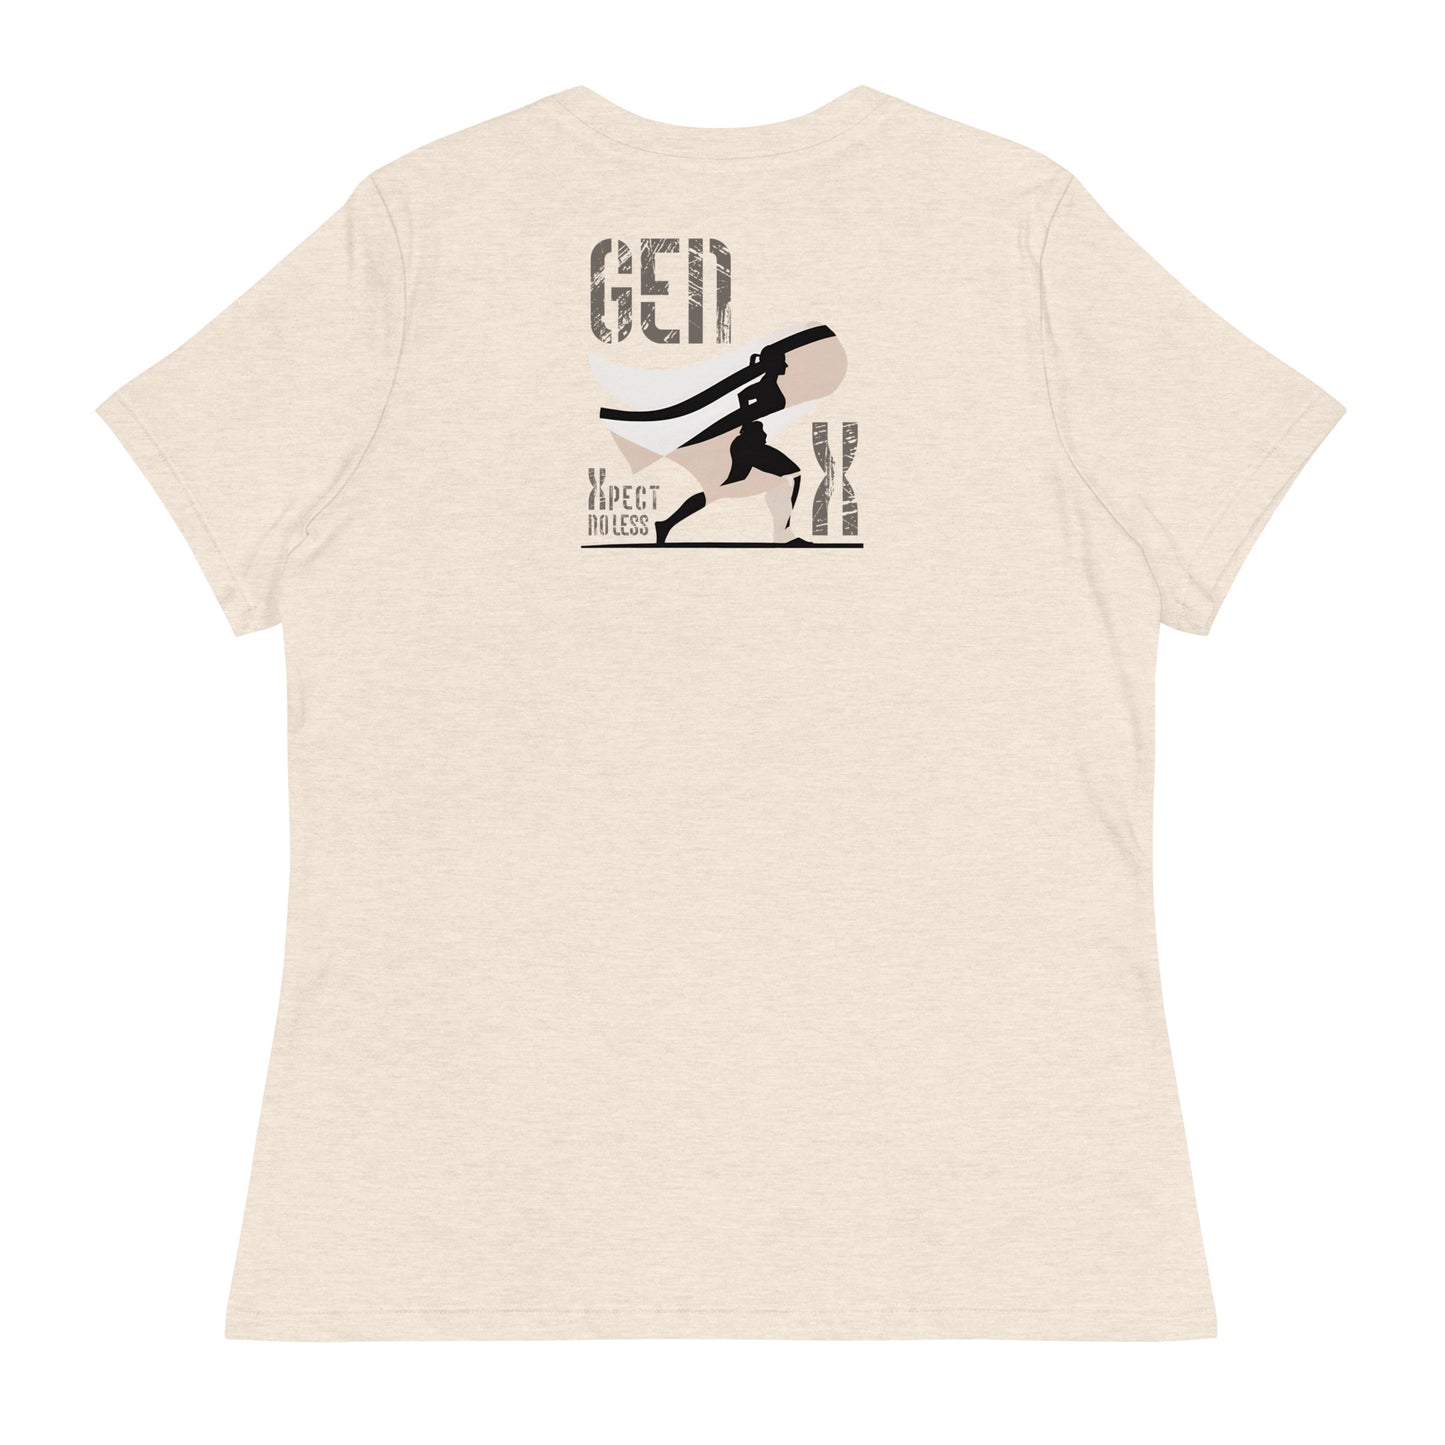 Xpect No Less: Women's GenX Graphic Relaxed T-Shirt